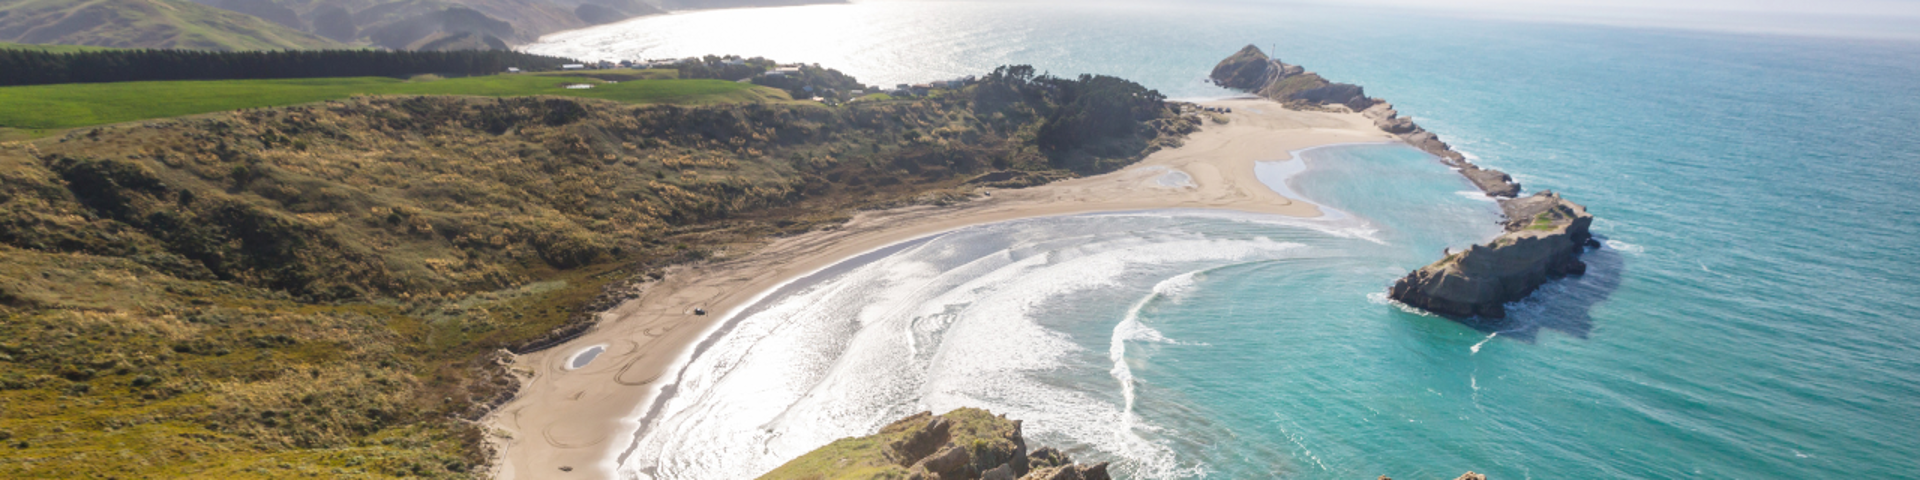 best holiday destinations for kiwis